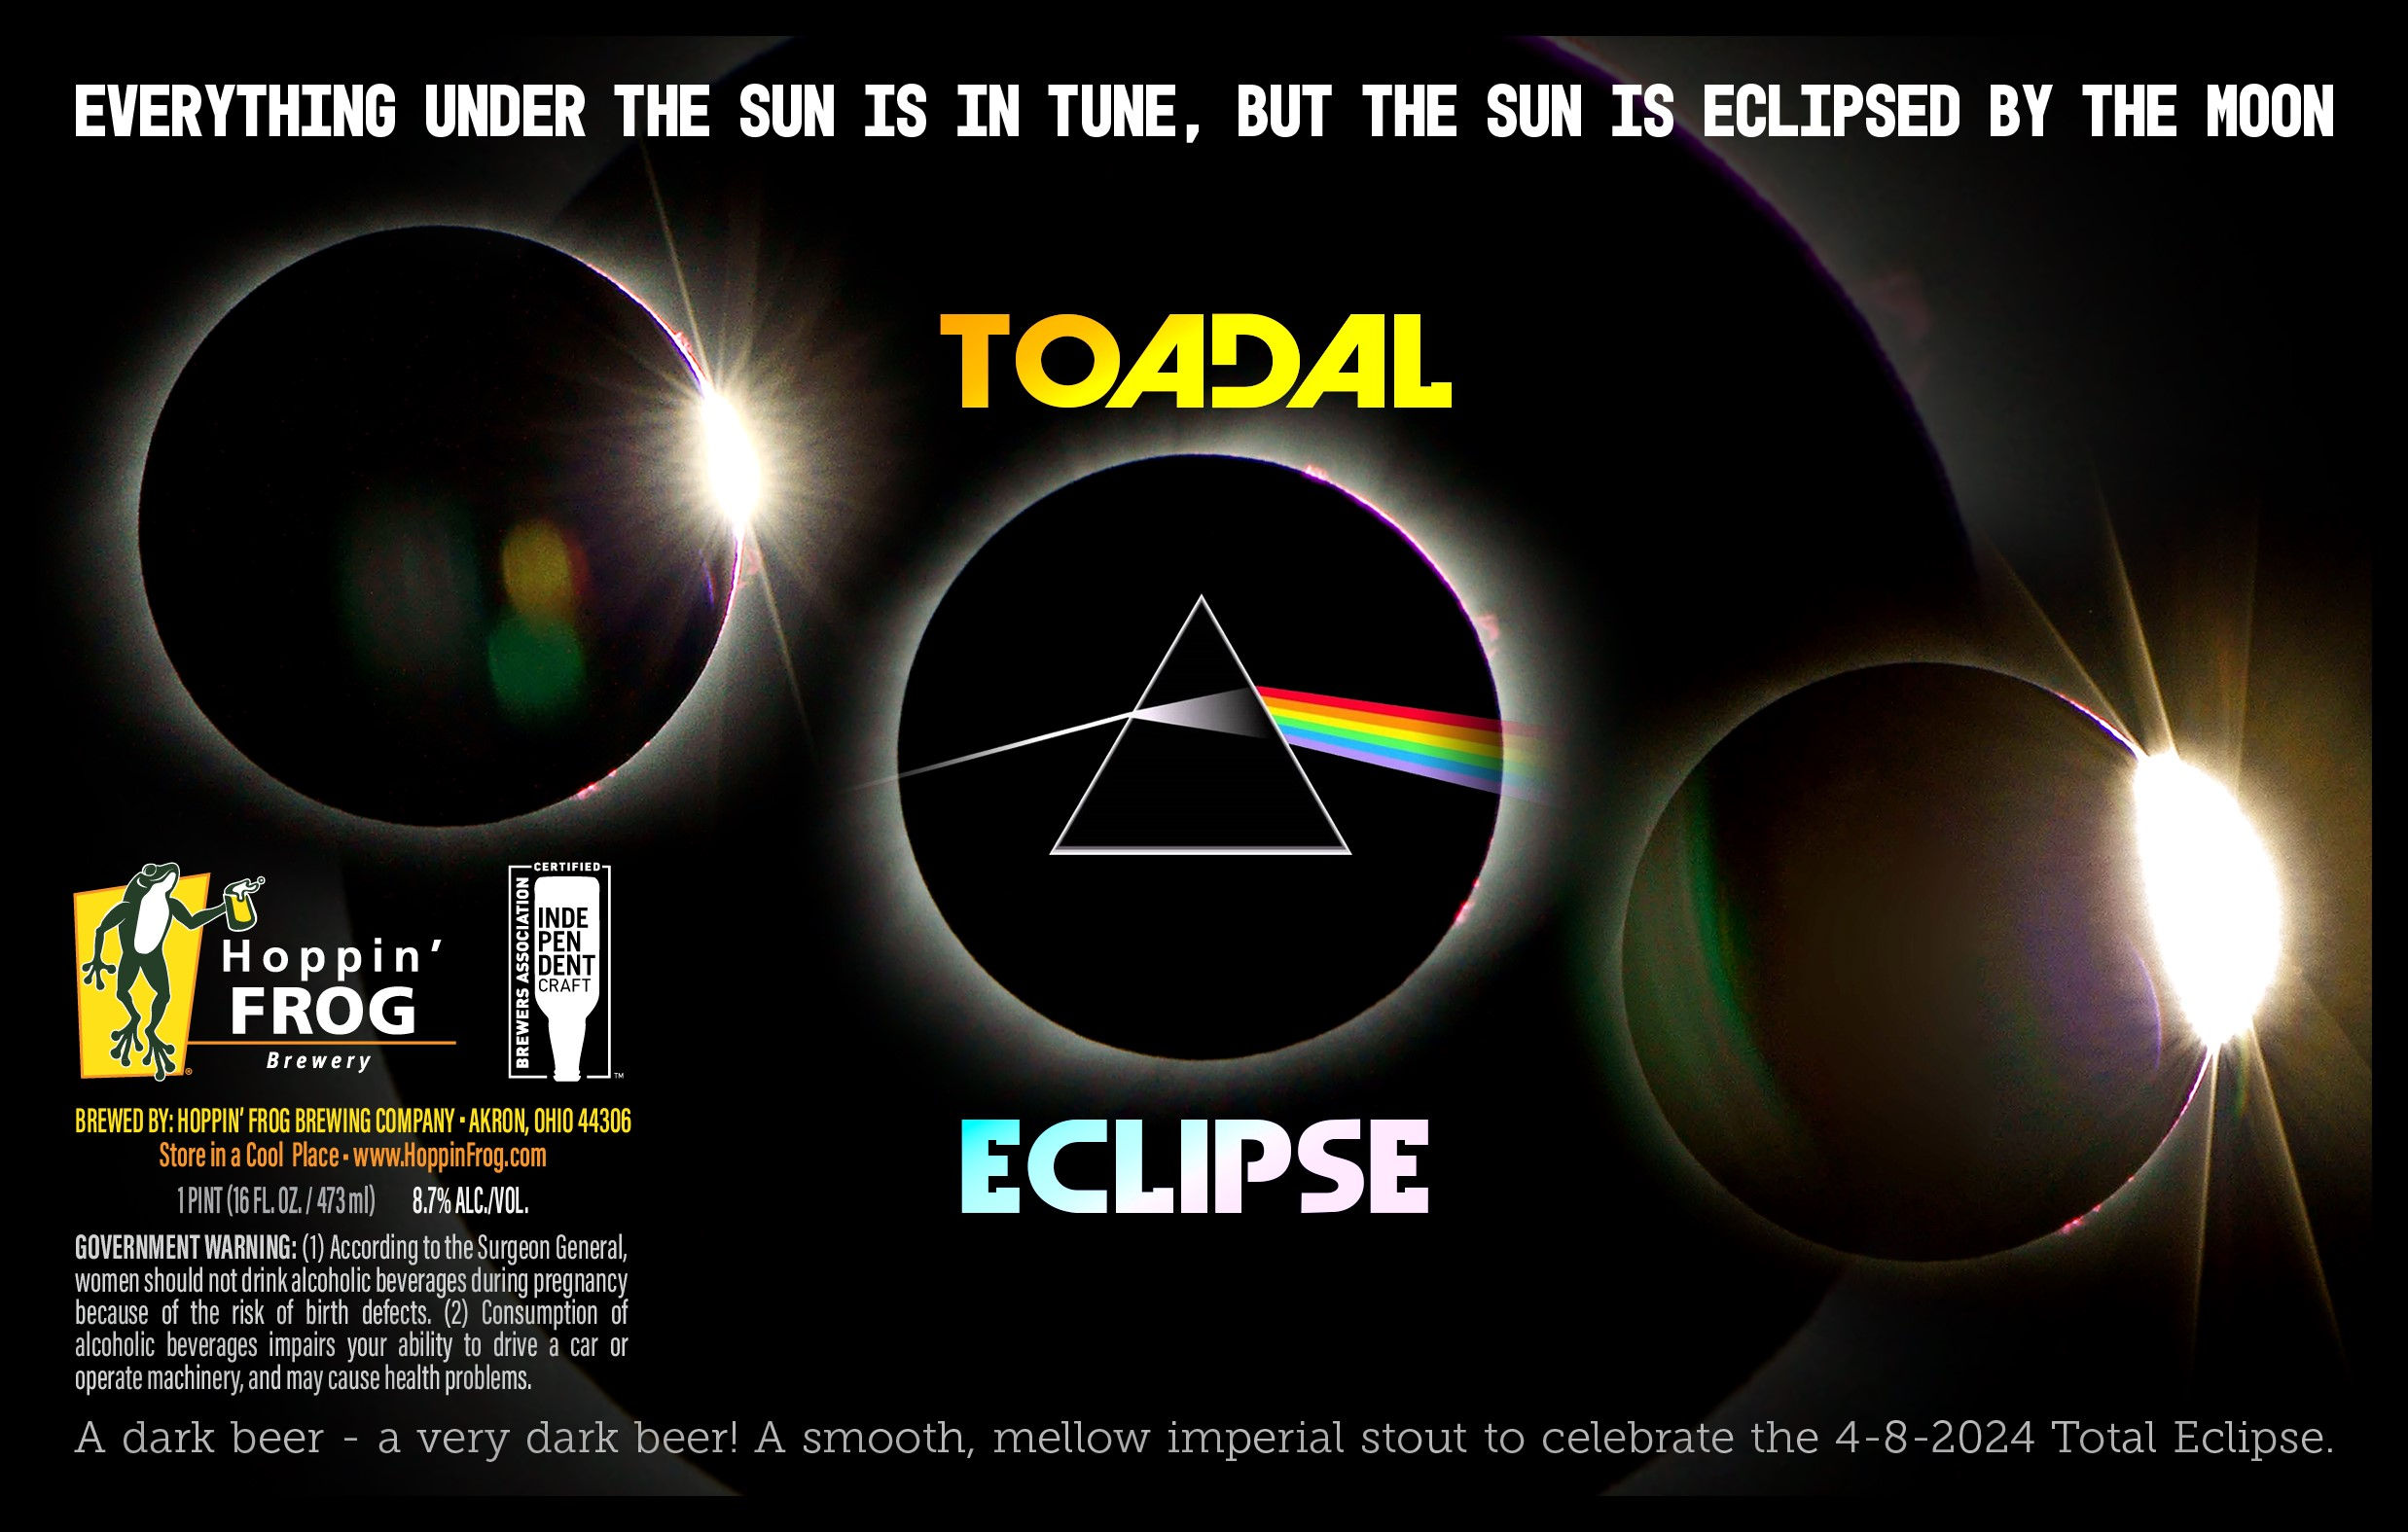 Hoppin’ Frog Adding Toadal Eclipse